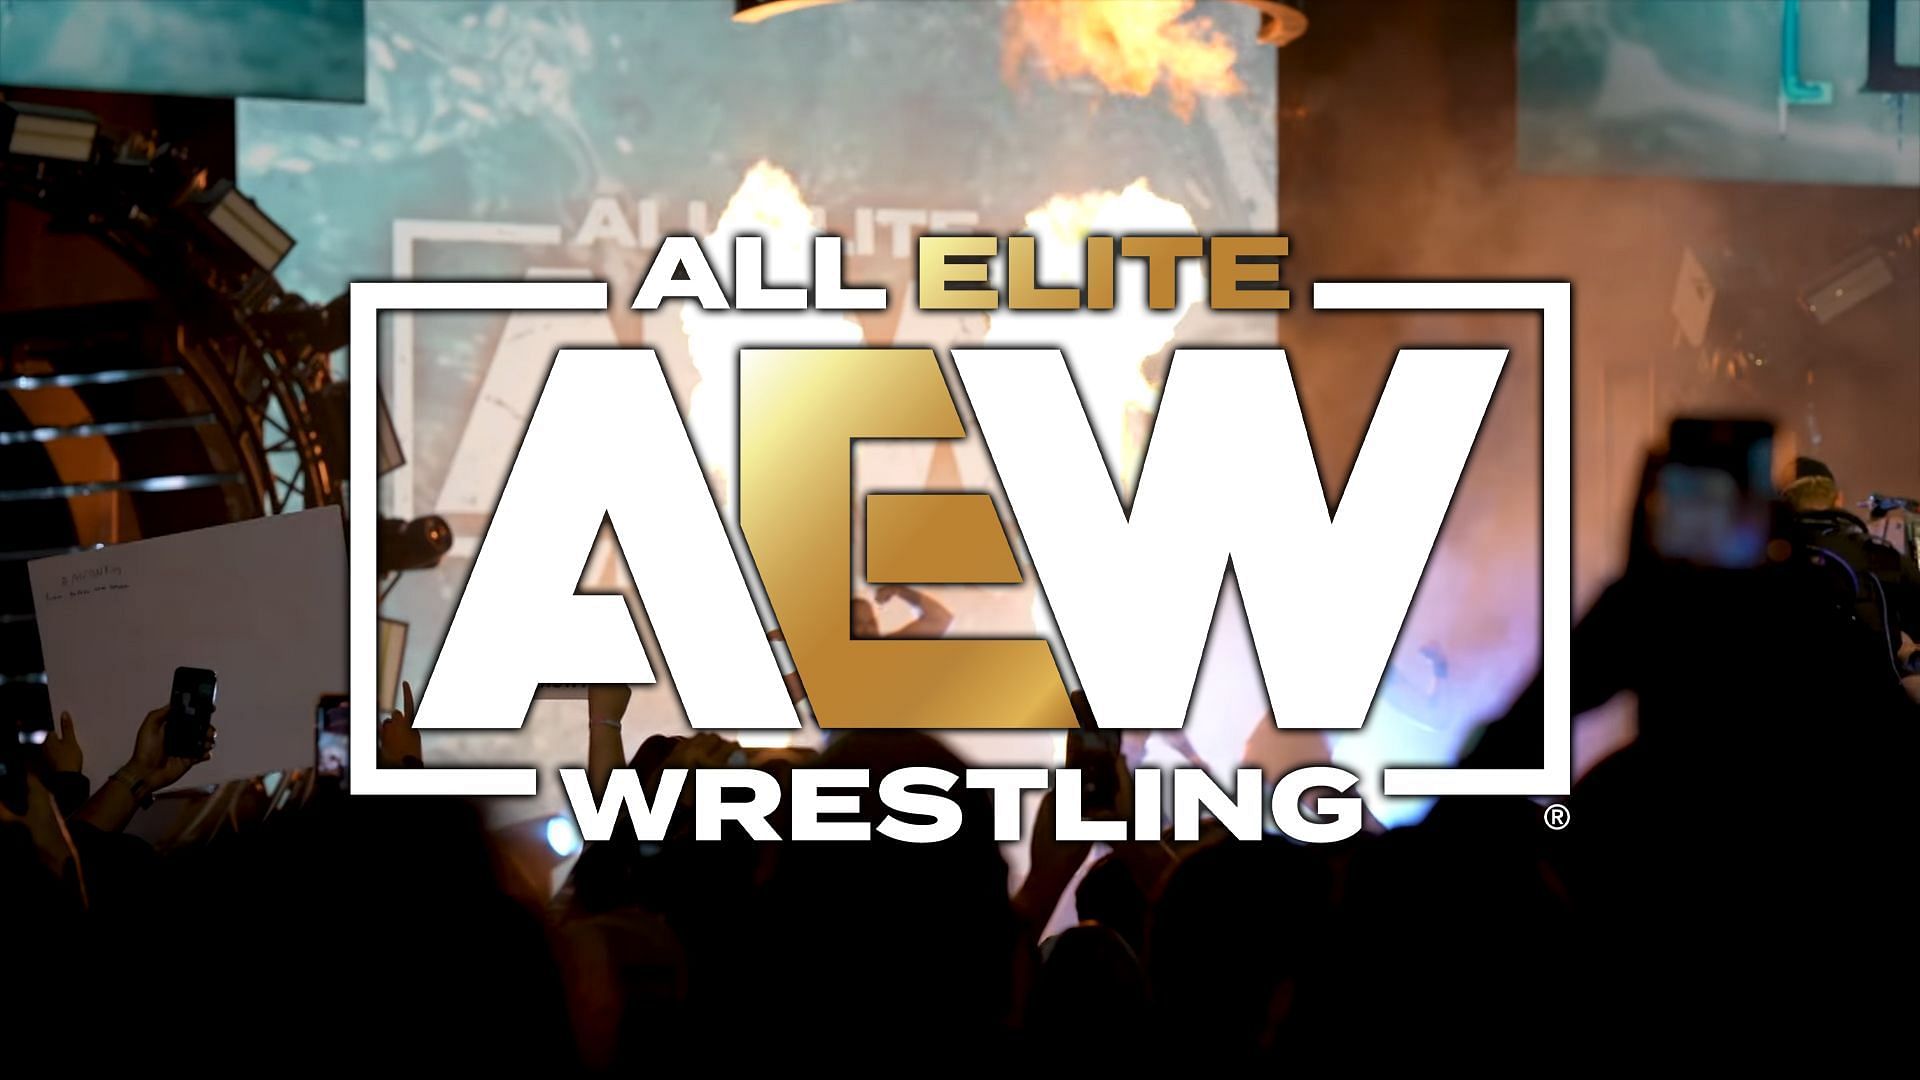 AEW and WWE are embroiled in a lawsuit (image credit: All Elite Wrestling on YouTube)